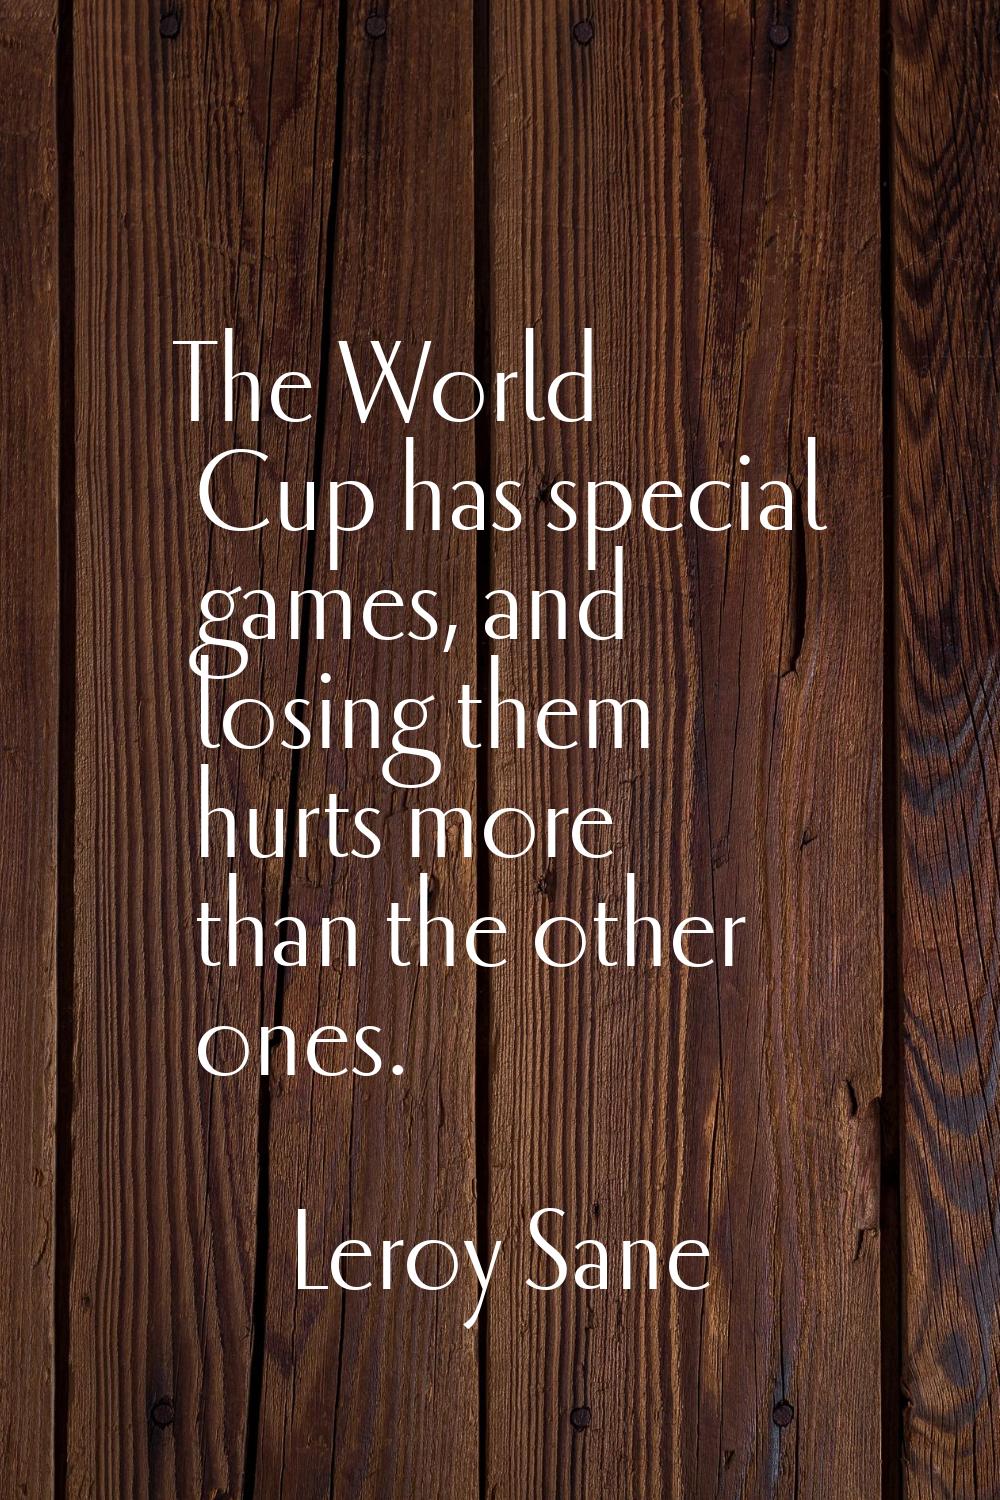 The World Cup has special games, and losing them hurts more than the other ones.